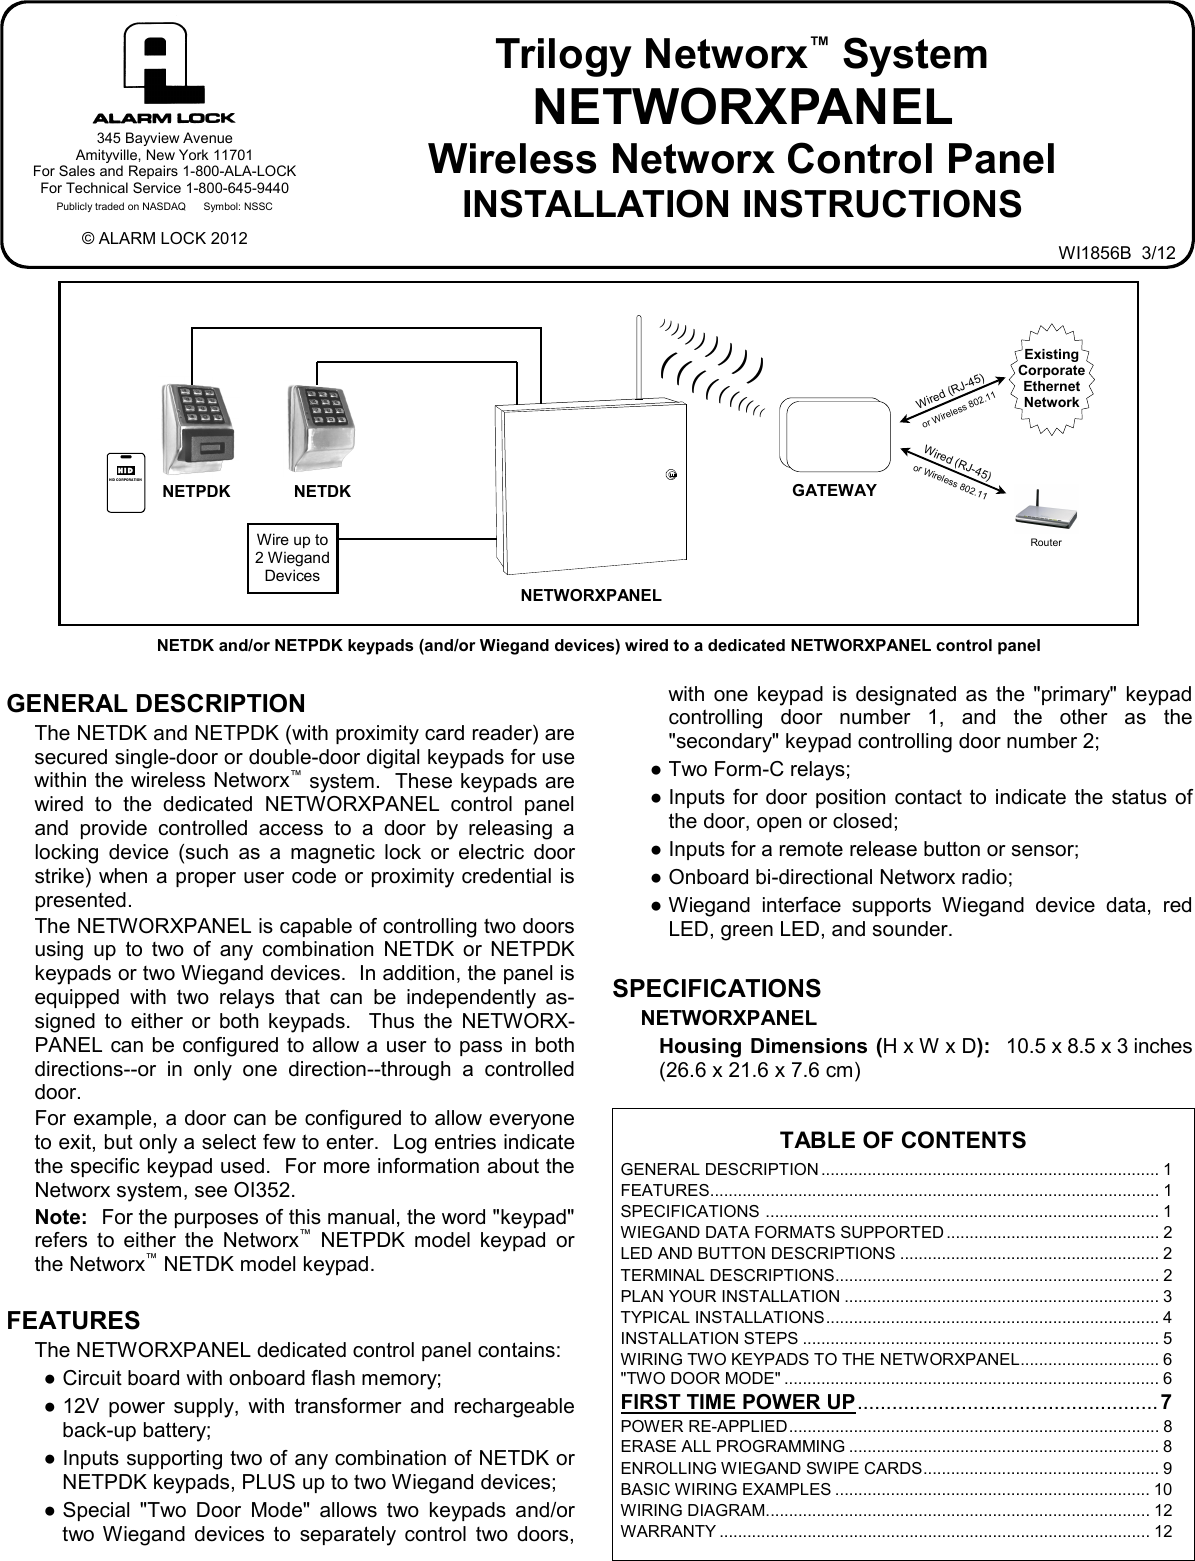 Page 1 of 12 - Alarm Lock NETWORXPANEL_WI1856B.02_INST NETWORXPANEL Wireless Networx Control Panel (NETDK/NETPDK) Installation Instructions WI1856B.02 INST